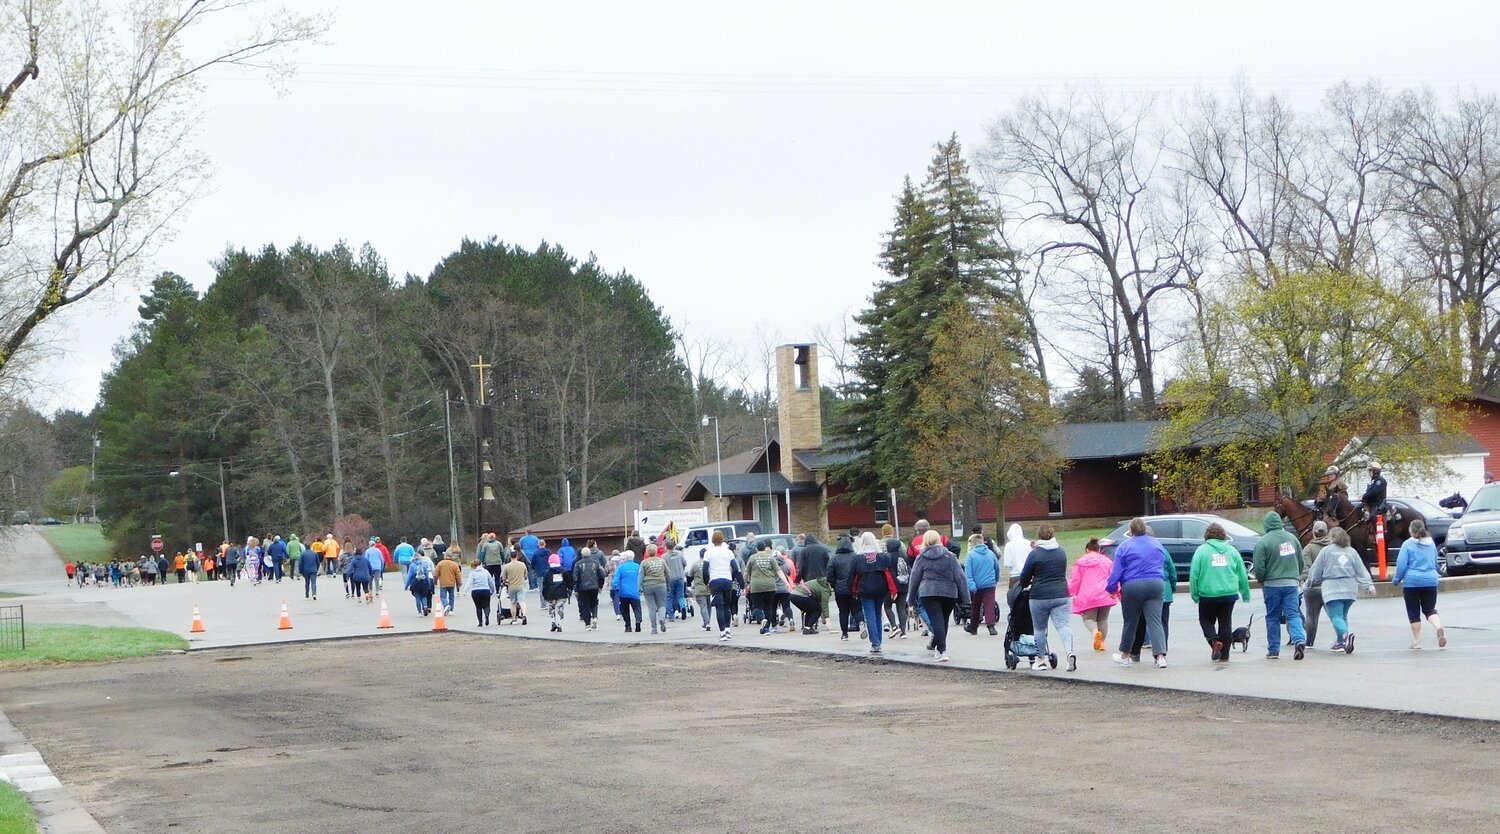 A sea of walkers strikes out on the 3.1-mile course, cheerful and committed to the task.